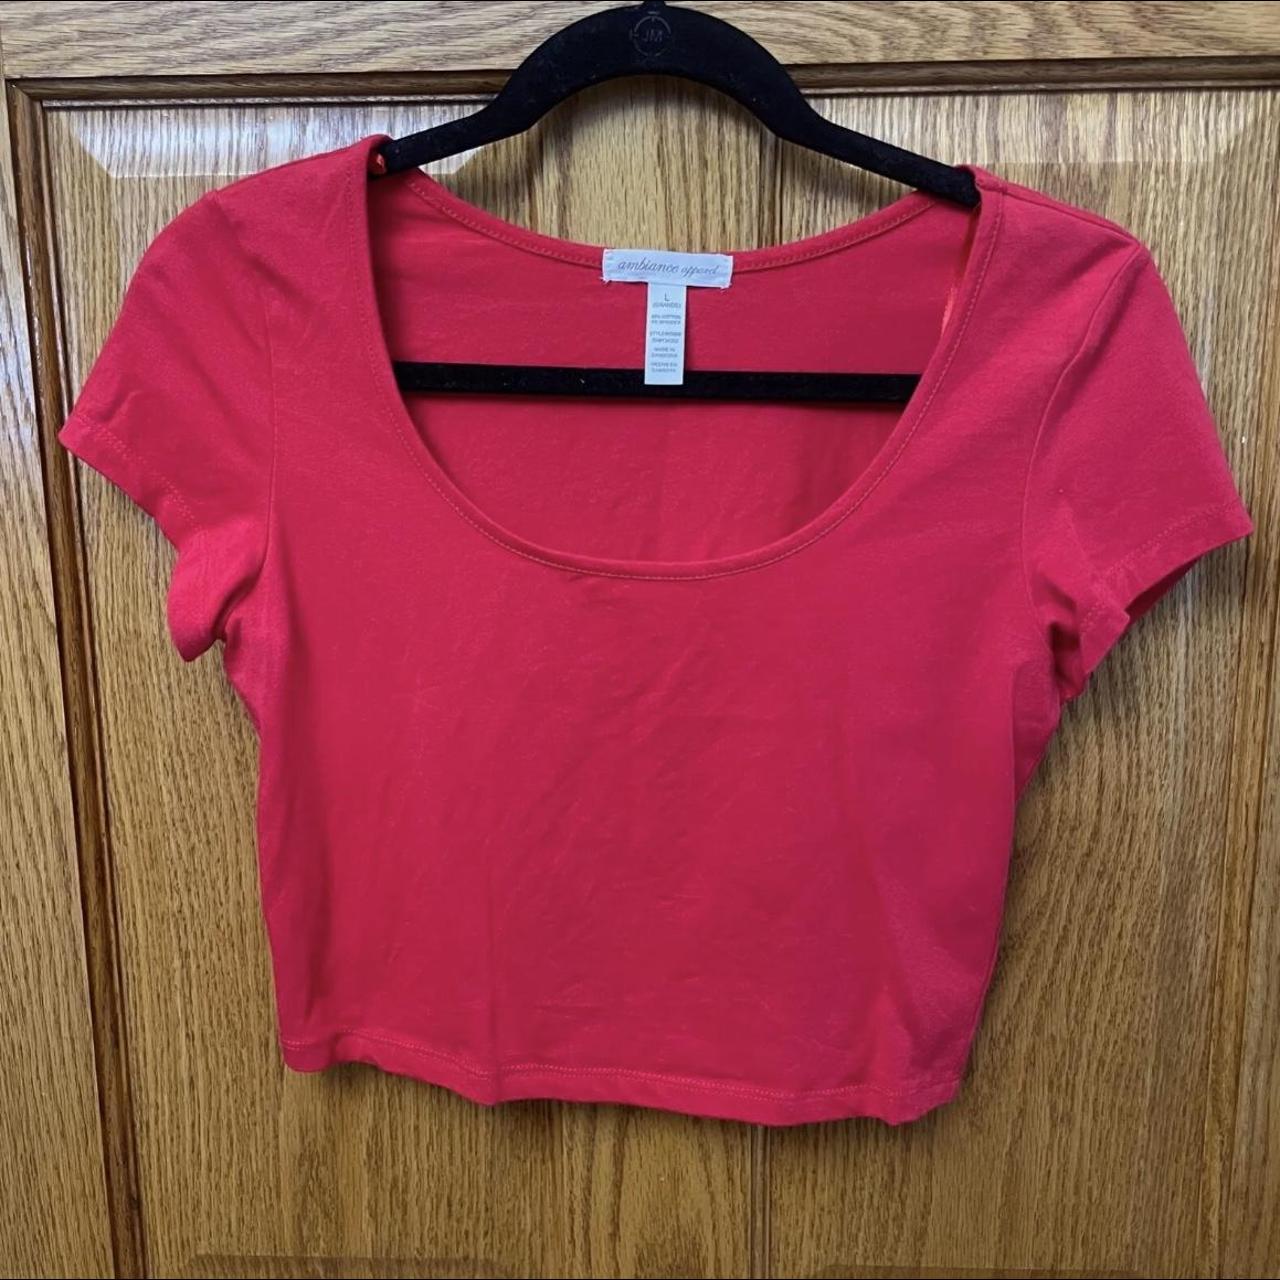 Ambiance Apparel  Ambiance apparel, Red crop top, Crop tops